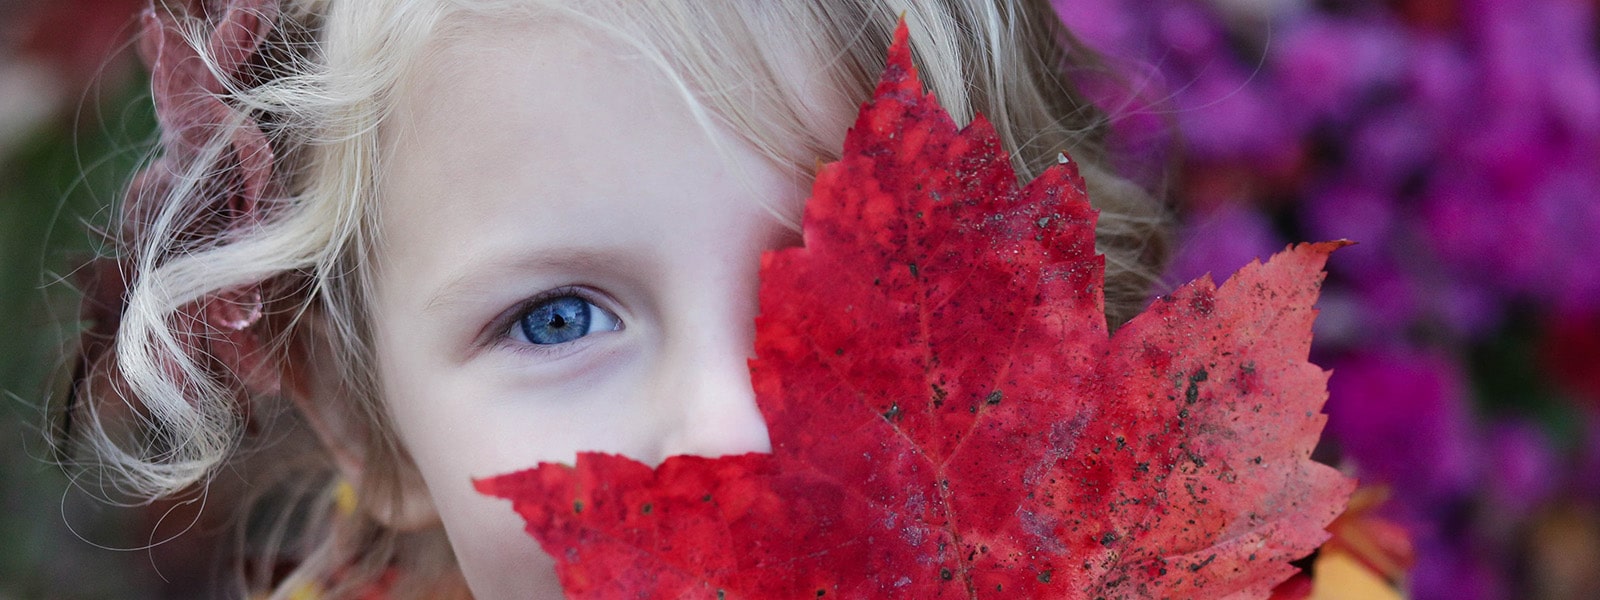 Young girl holding a large red leaf in front of her face